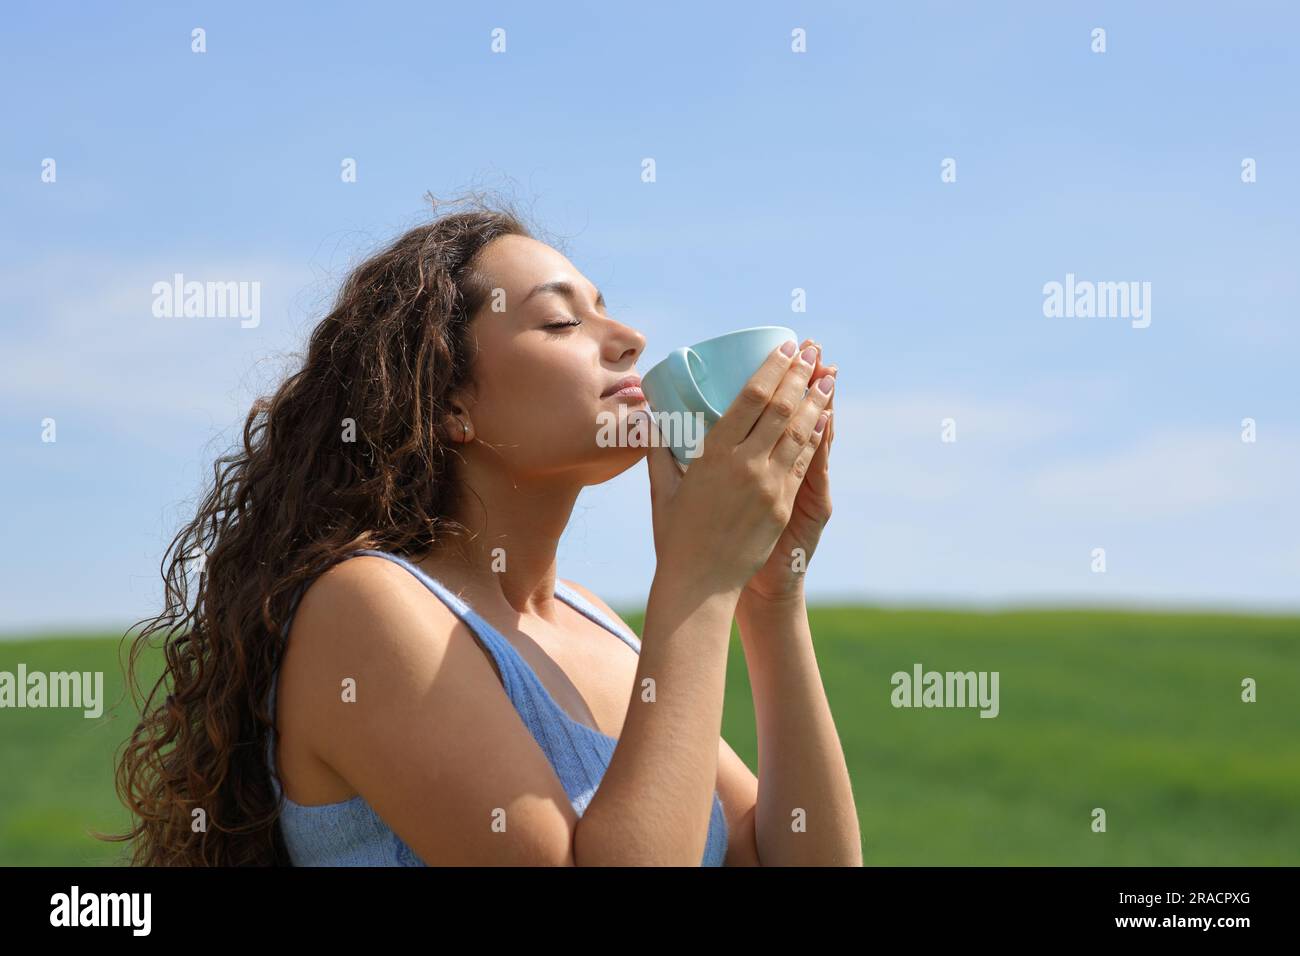 Profile of a woman drinking coffee in a green field Stock Photo